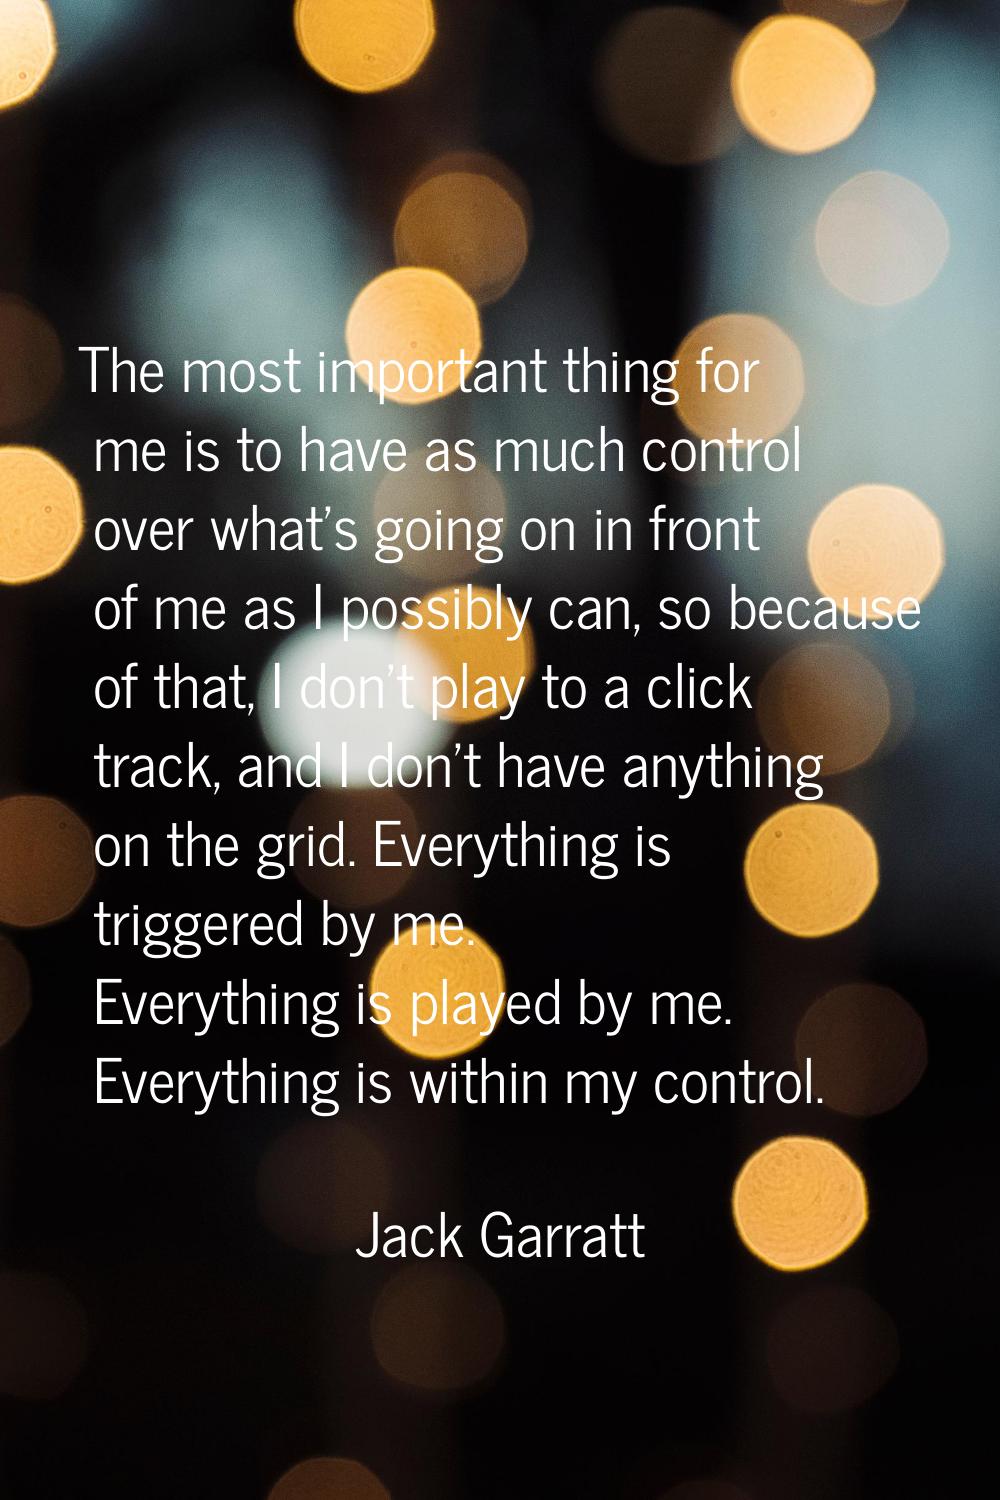 The most important thing for me is to have as much control over what's going on in front of me as I